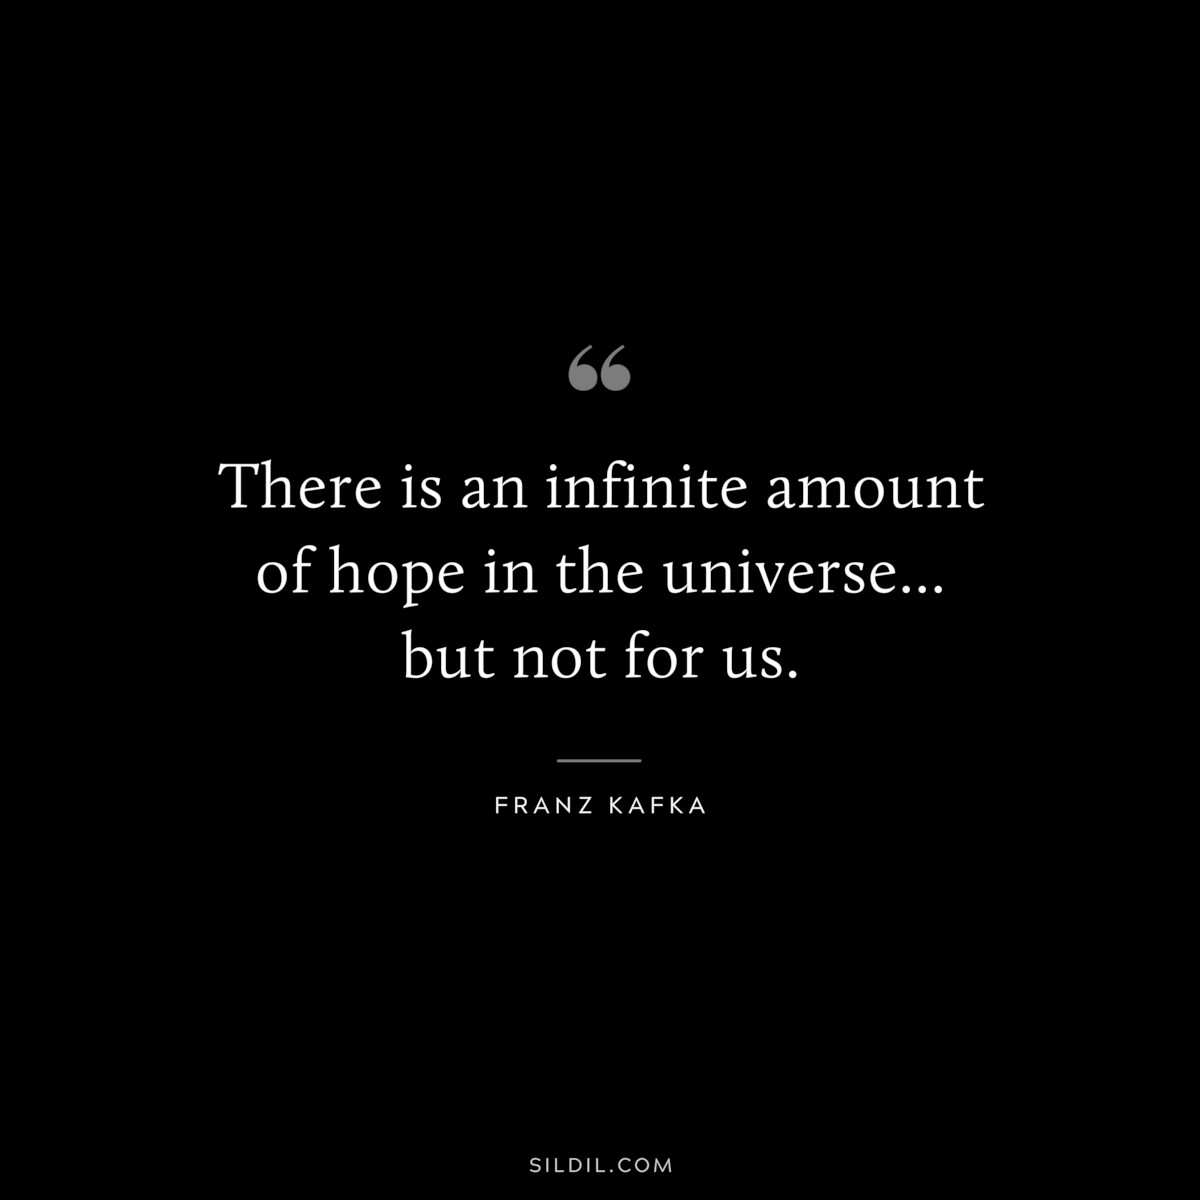 There is an infinite amount of hope in the universe... but not for us. ― Franz Kafka